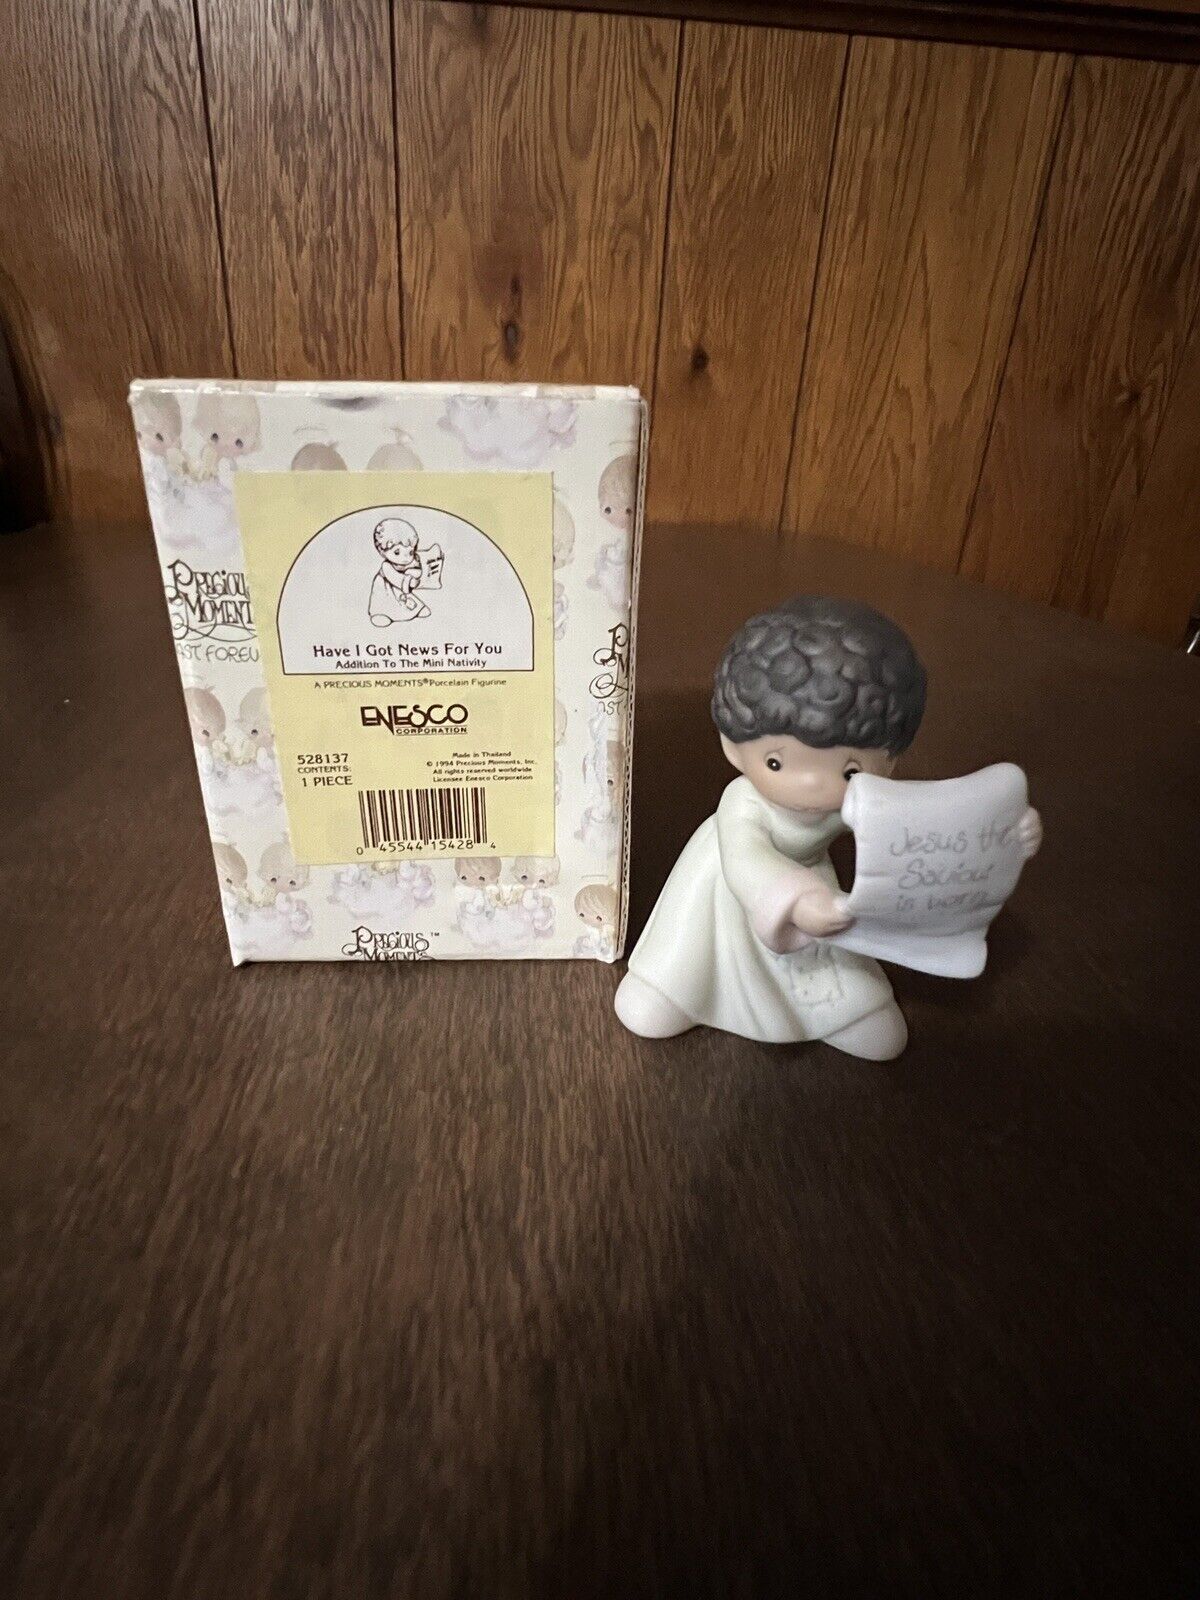 Precious Moments “Have I Got News For You” Addition To The Mini Nativity 528137